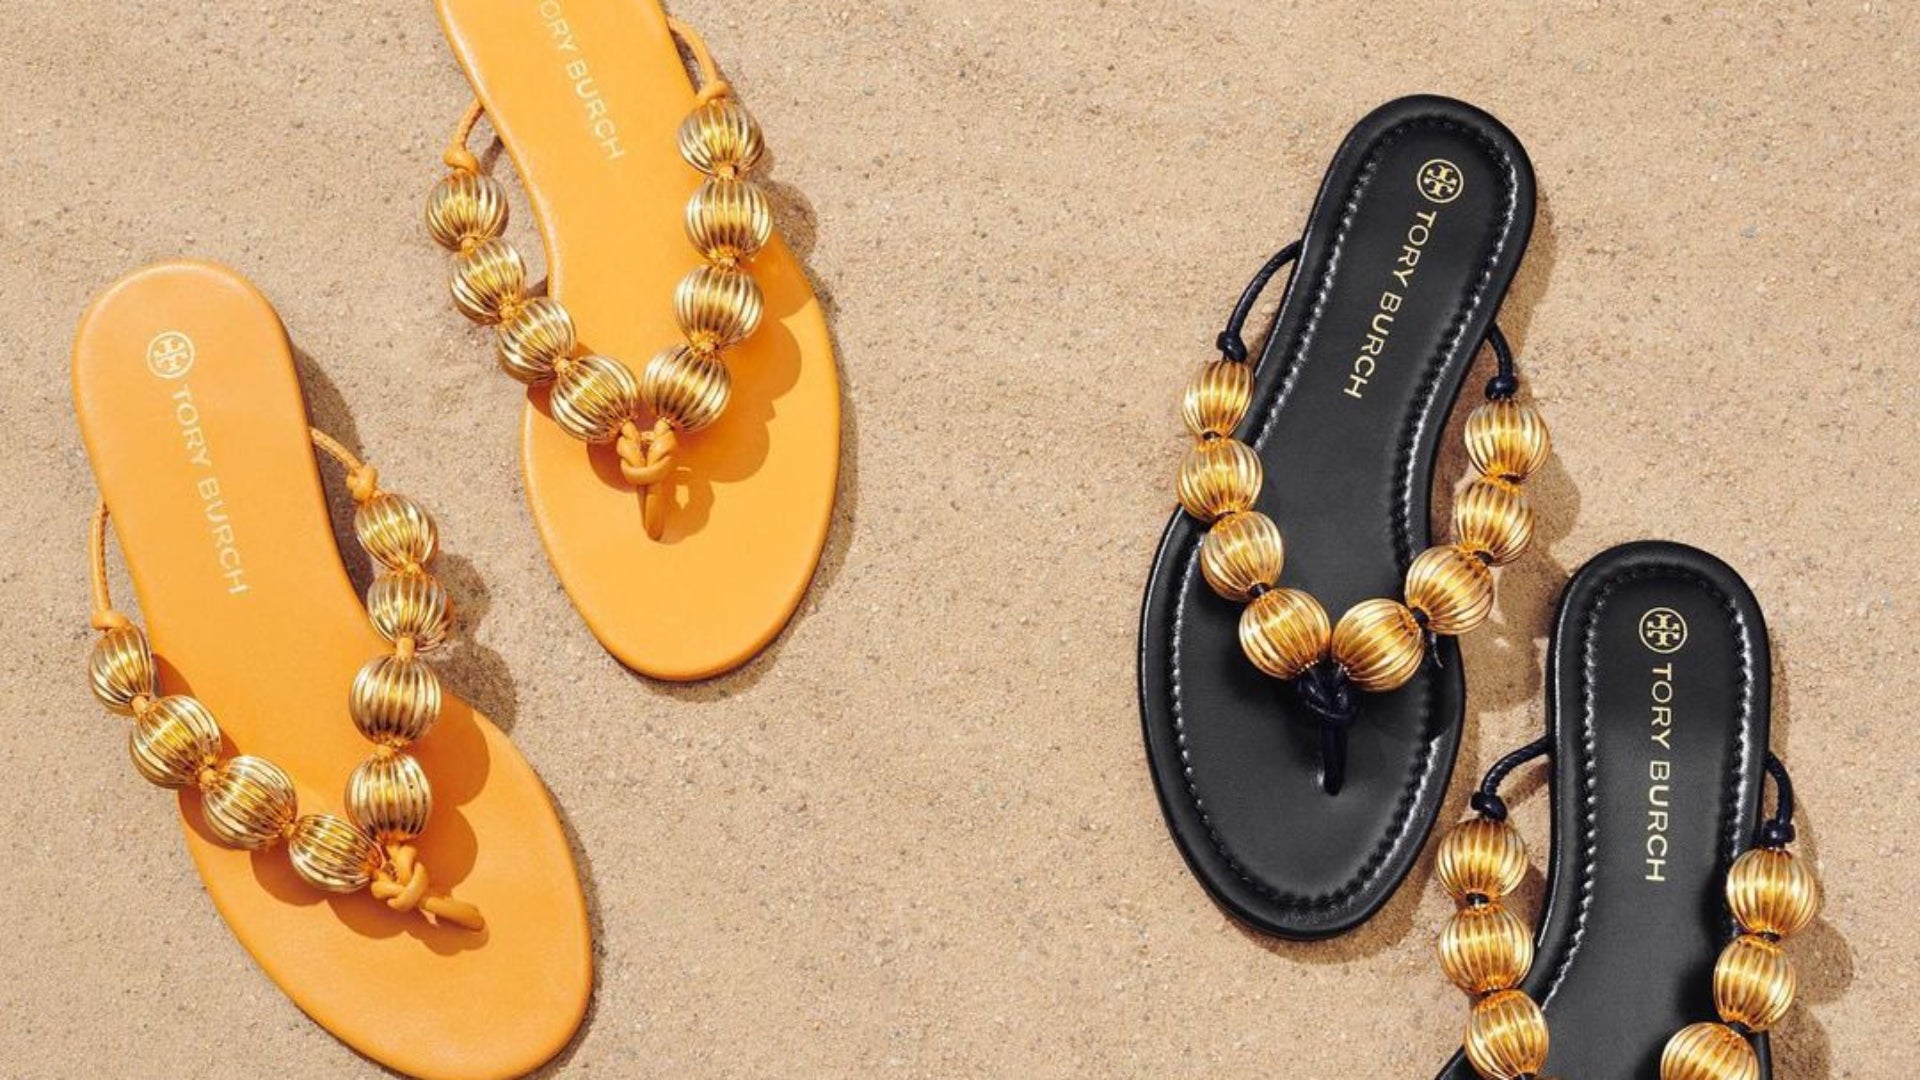 Tory Burch And Veronica Beard Shoes Are 30% Off At Saks Fifth Avenue, And You Don't Want To Miss The Sale